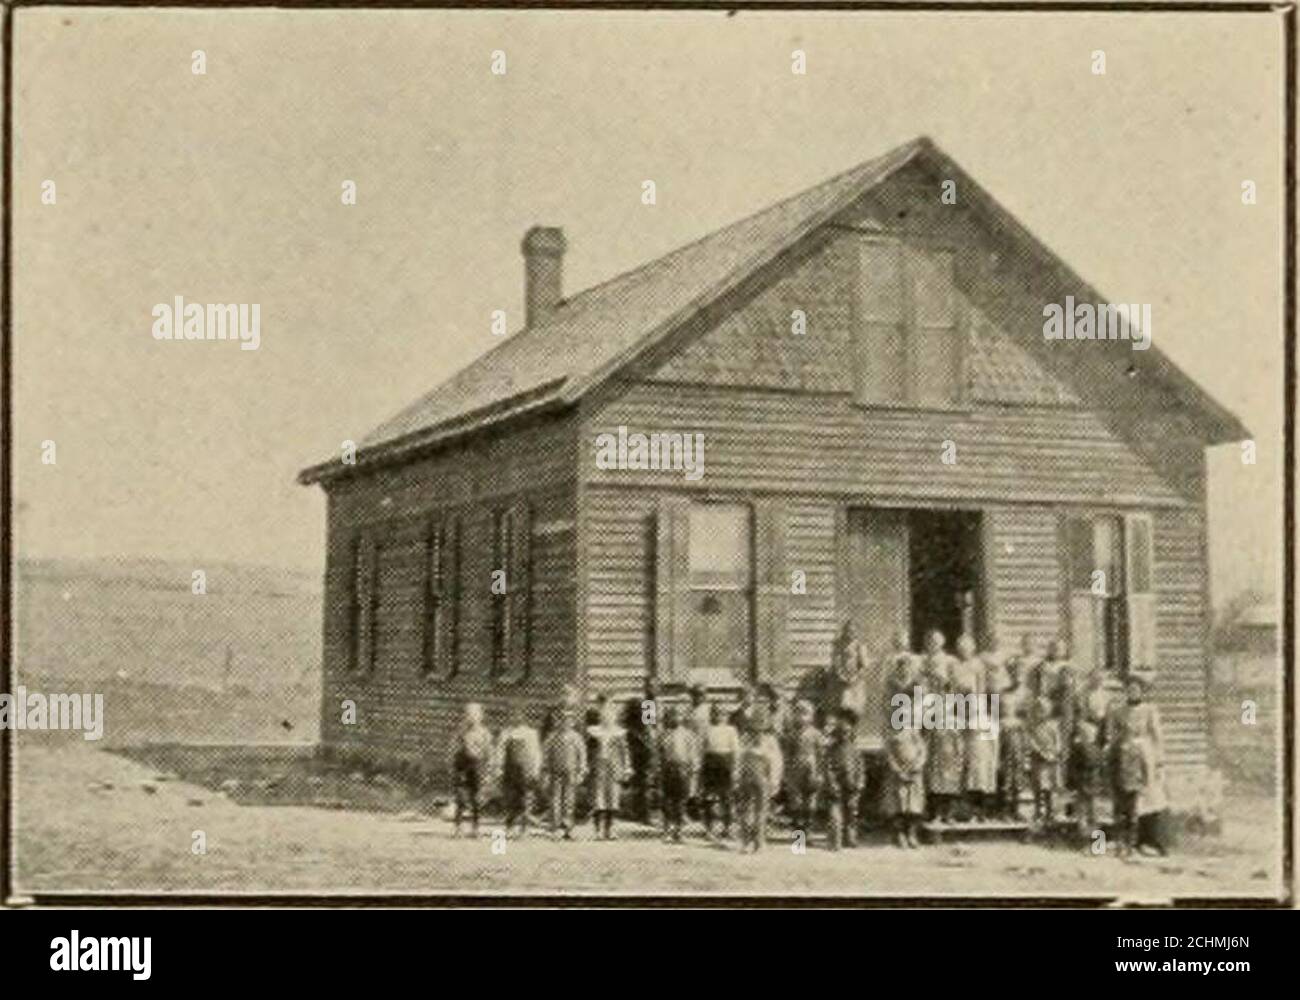 . Early history of Wabaunsee County, Kansas, with stories of pioneer days and glimpses of our western border.. . Stone School-hocse. Falk School Building. ^. /- ,„^7, ,^ ^^jfiwTif^^^yTBiiPfcj * Yii wbh. Old School Building. Keene School Building. THE ALMA CITY SCHOOLS. EARLY HISTORY OF WABAUNSEE COUNTY, KAN. 181 Wabaunsee County Election Returns, 1881. Candidates. &gt; 5 Bffl -&gt; 7i S 15 B W ic o 2: Q 0 — 1=! E. en ■^ « 69 71 8 15 492 105 W. A. Ddolitlle 43 6 4 6 18 52 37 103 .35 50 34 387 T.N. Watts 2rt 1924 45 1 21 8 356 11 10 333 4968 2936 2311 20 7 317230 D. V. Dowd SUerlfif. H.J. Pippe Stock Photo